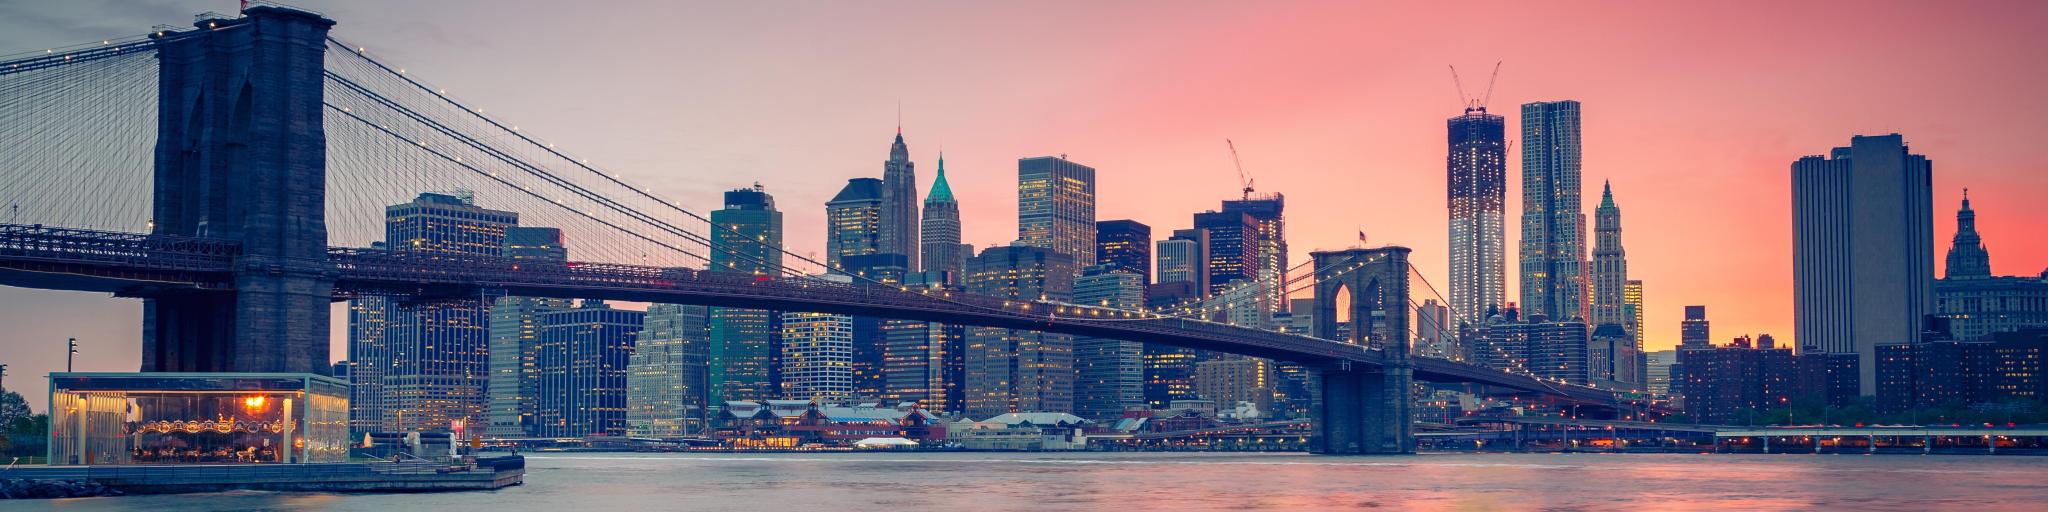 New York City, USA with Brooklyn Bridge at dusk, the city skyline in the distance and a red hue in the sky.